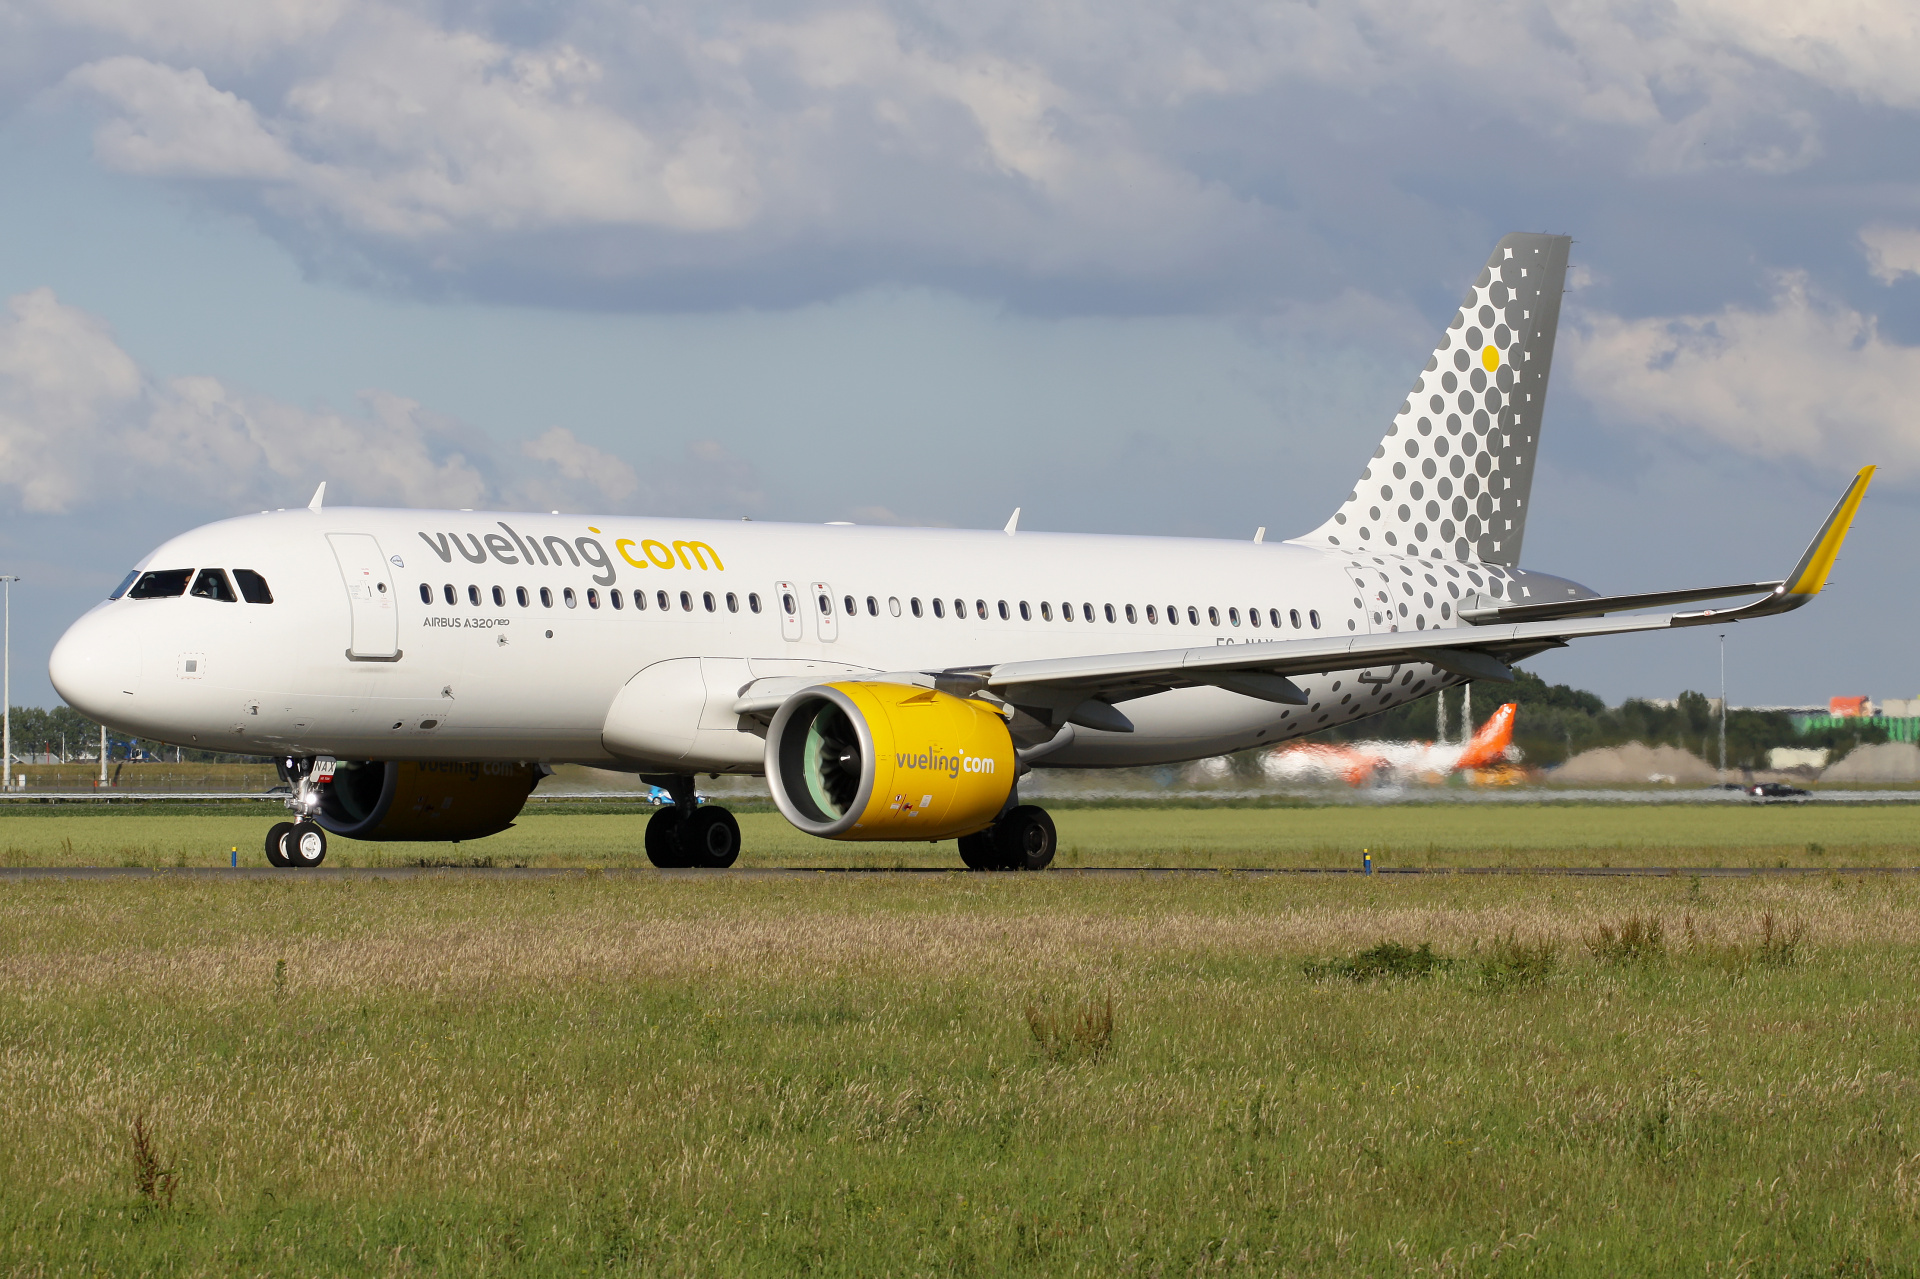 EC-NAX (Aircraft » Schiphol Spotting » Airbus A320neo » Vueling Airlines)